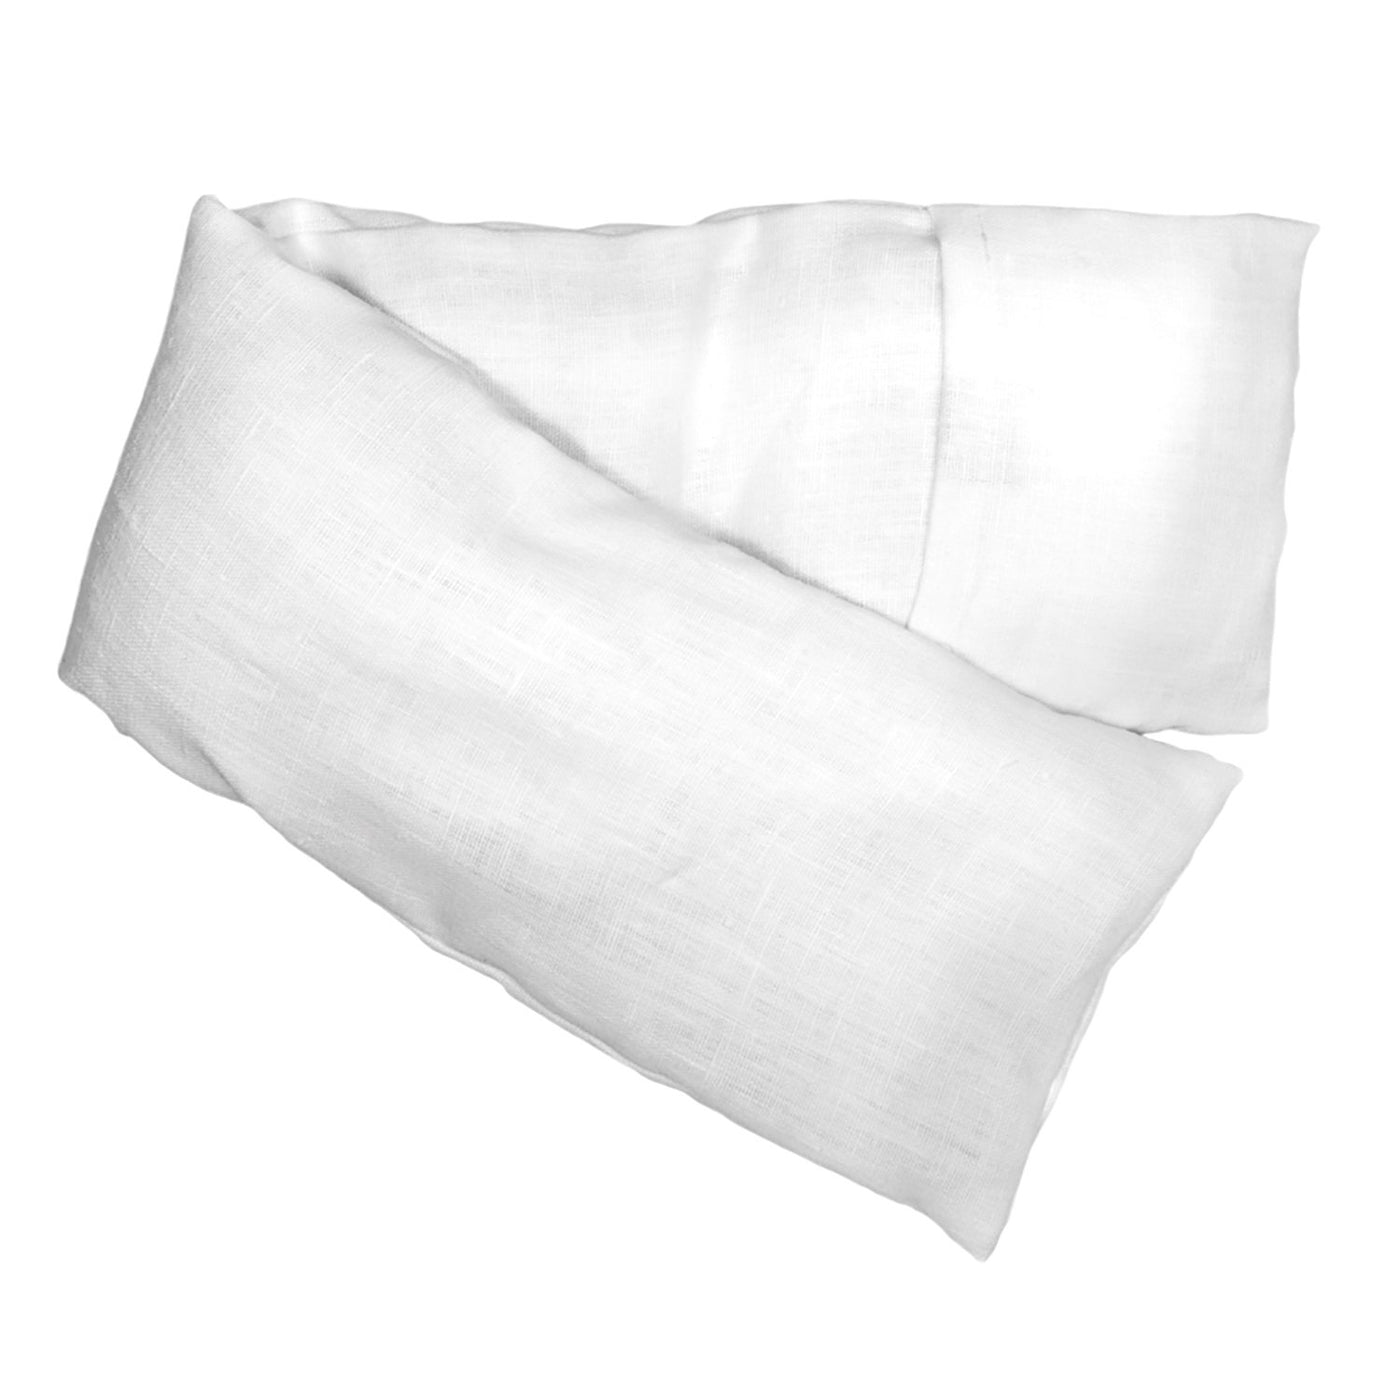 ELIZABETH W HOT/COLD WASHED IVORY LINEN COVERED FLAXSEED PACKS